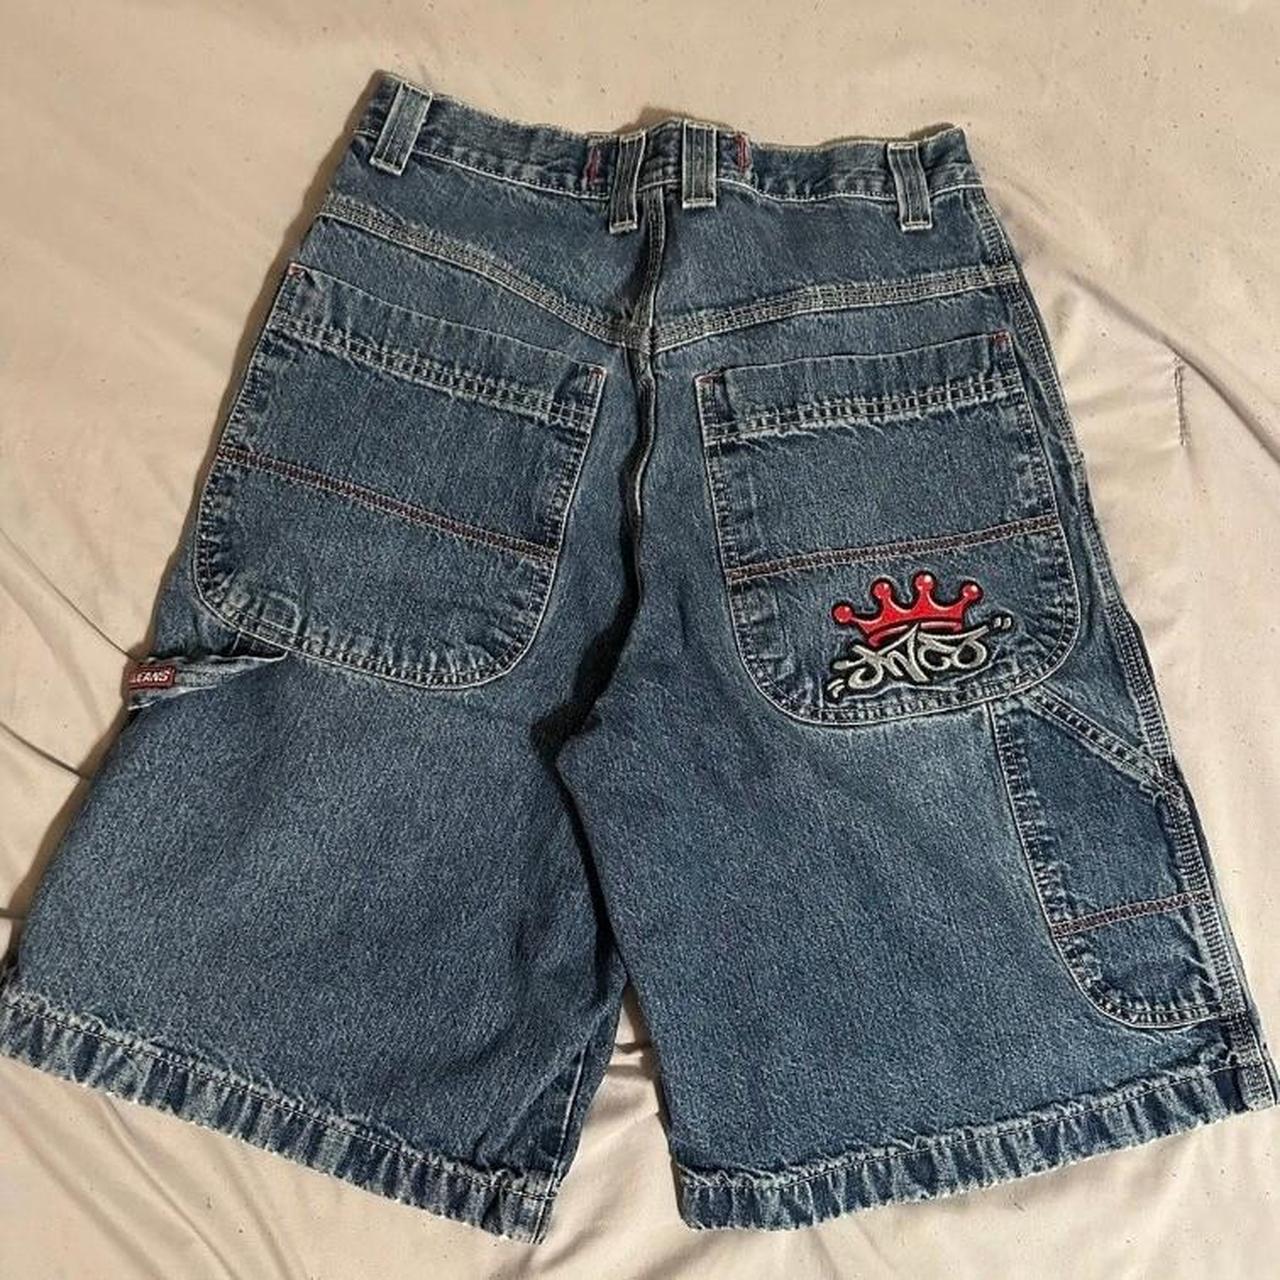 JNCO Men's Red and Blue Jeans | Depop